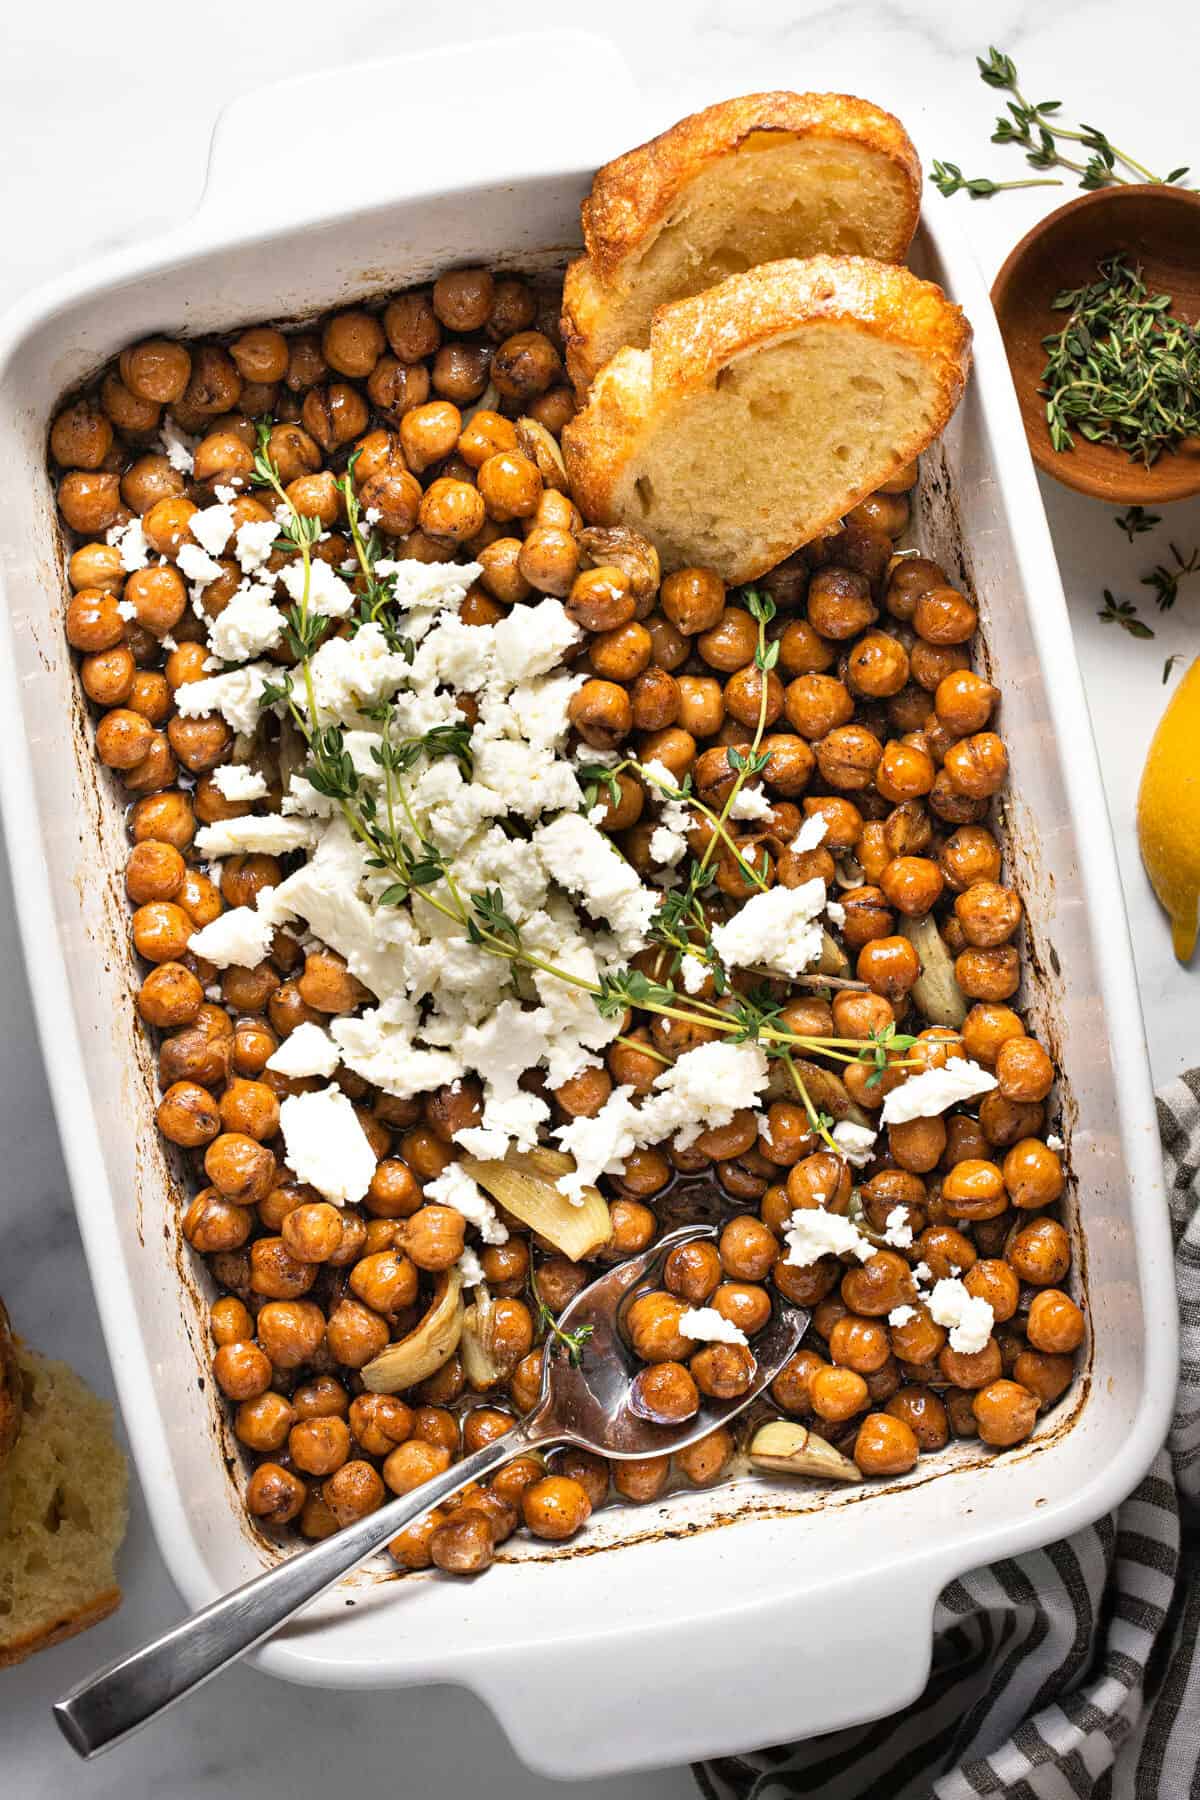 Large baking dish filled with braised chickpeas topped with feta and herbs